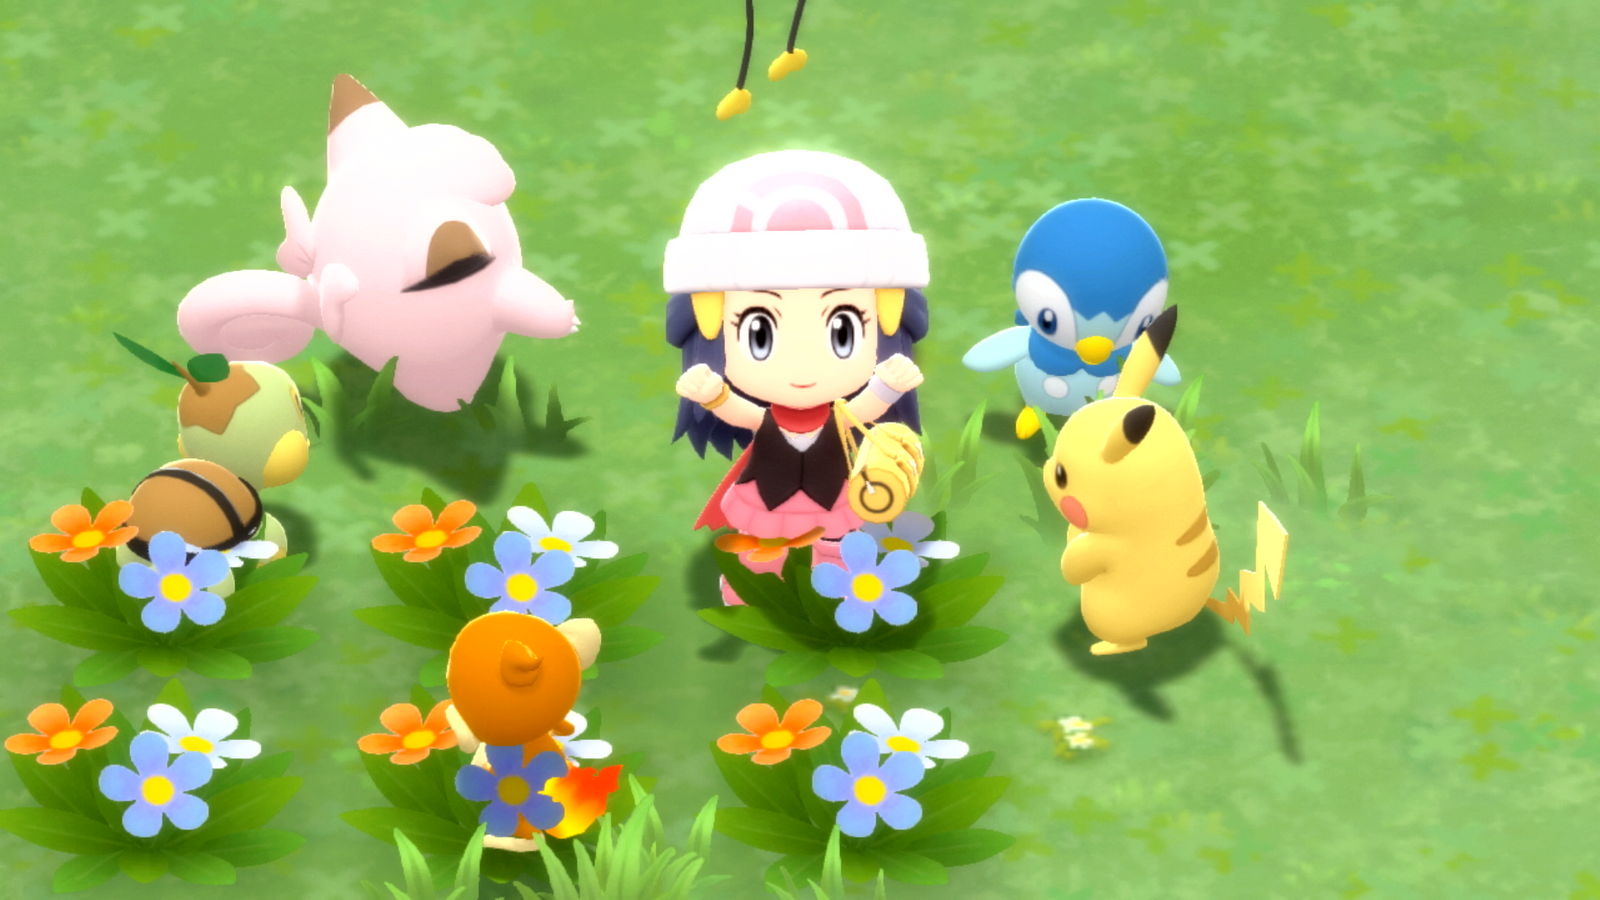 A Pokémon Trainer in Amity Square with all three starter Pokémon, Piplup, Turtwig, and Chimchar, as well as Cleffa and Pikachu in Pokémon Brilliant Diamond and Shining Pearl.